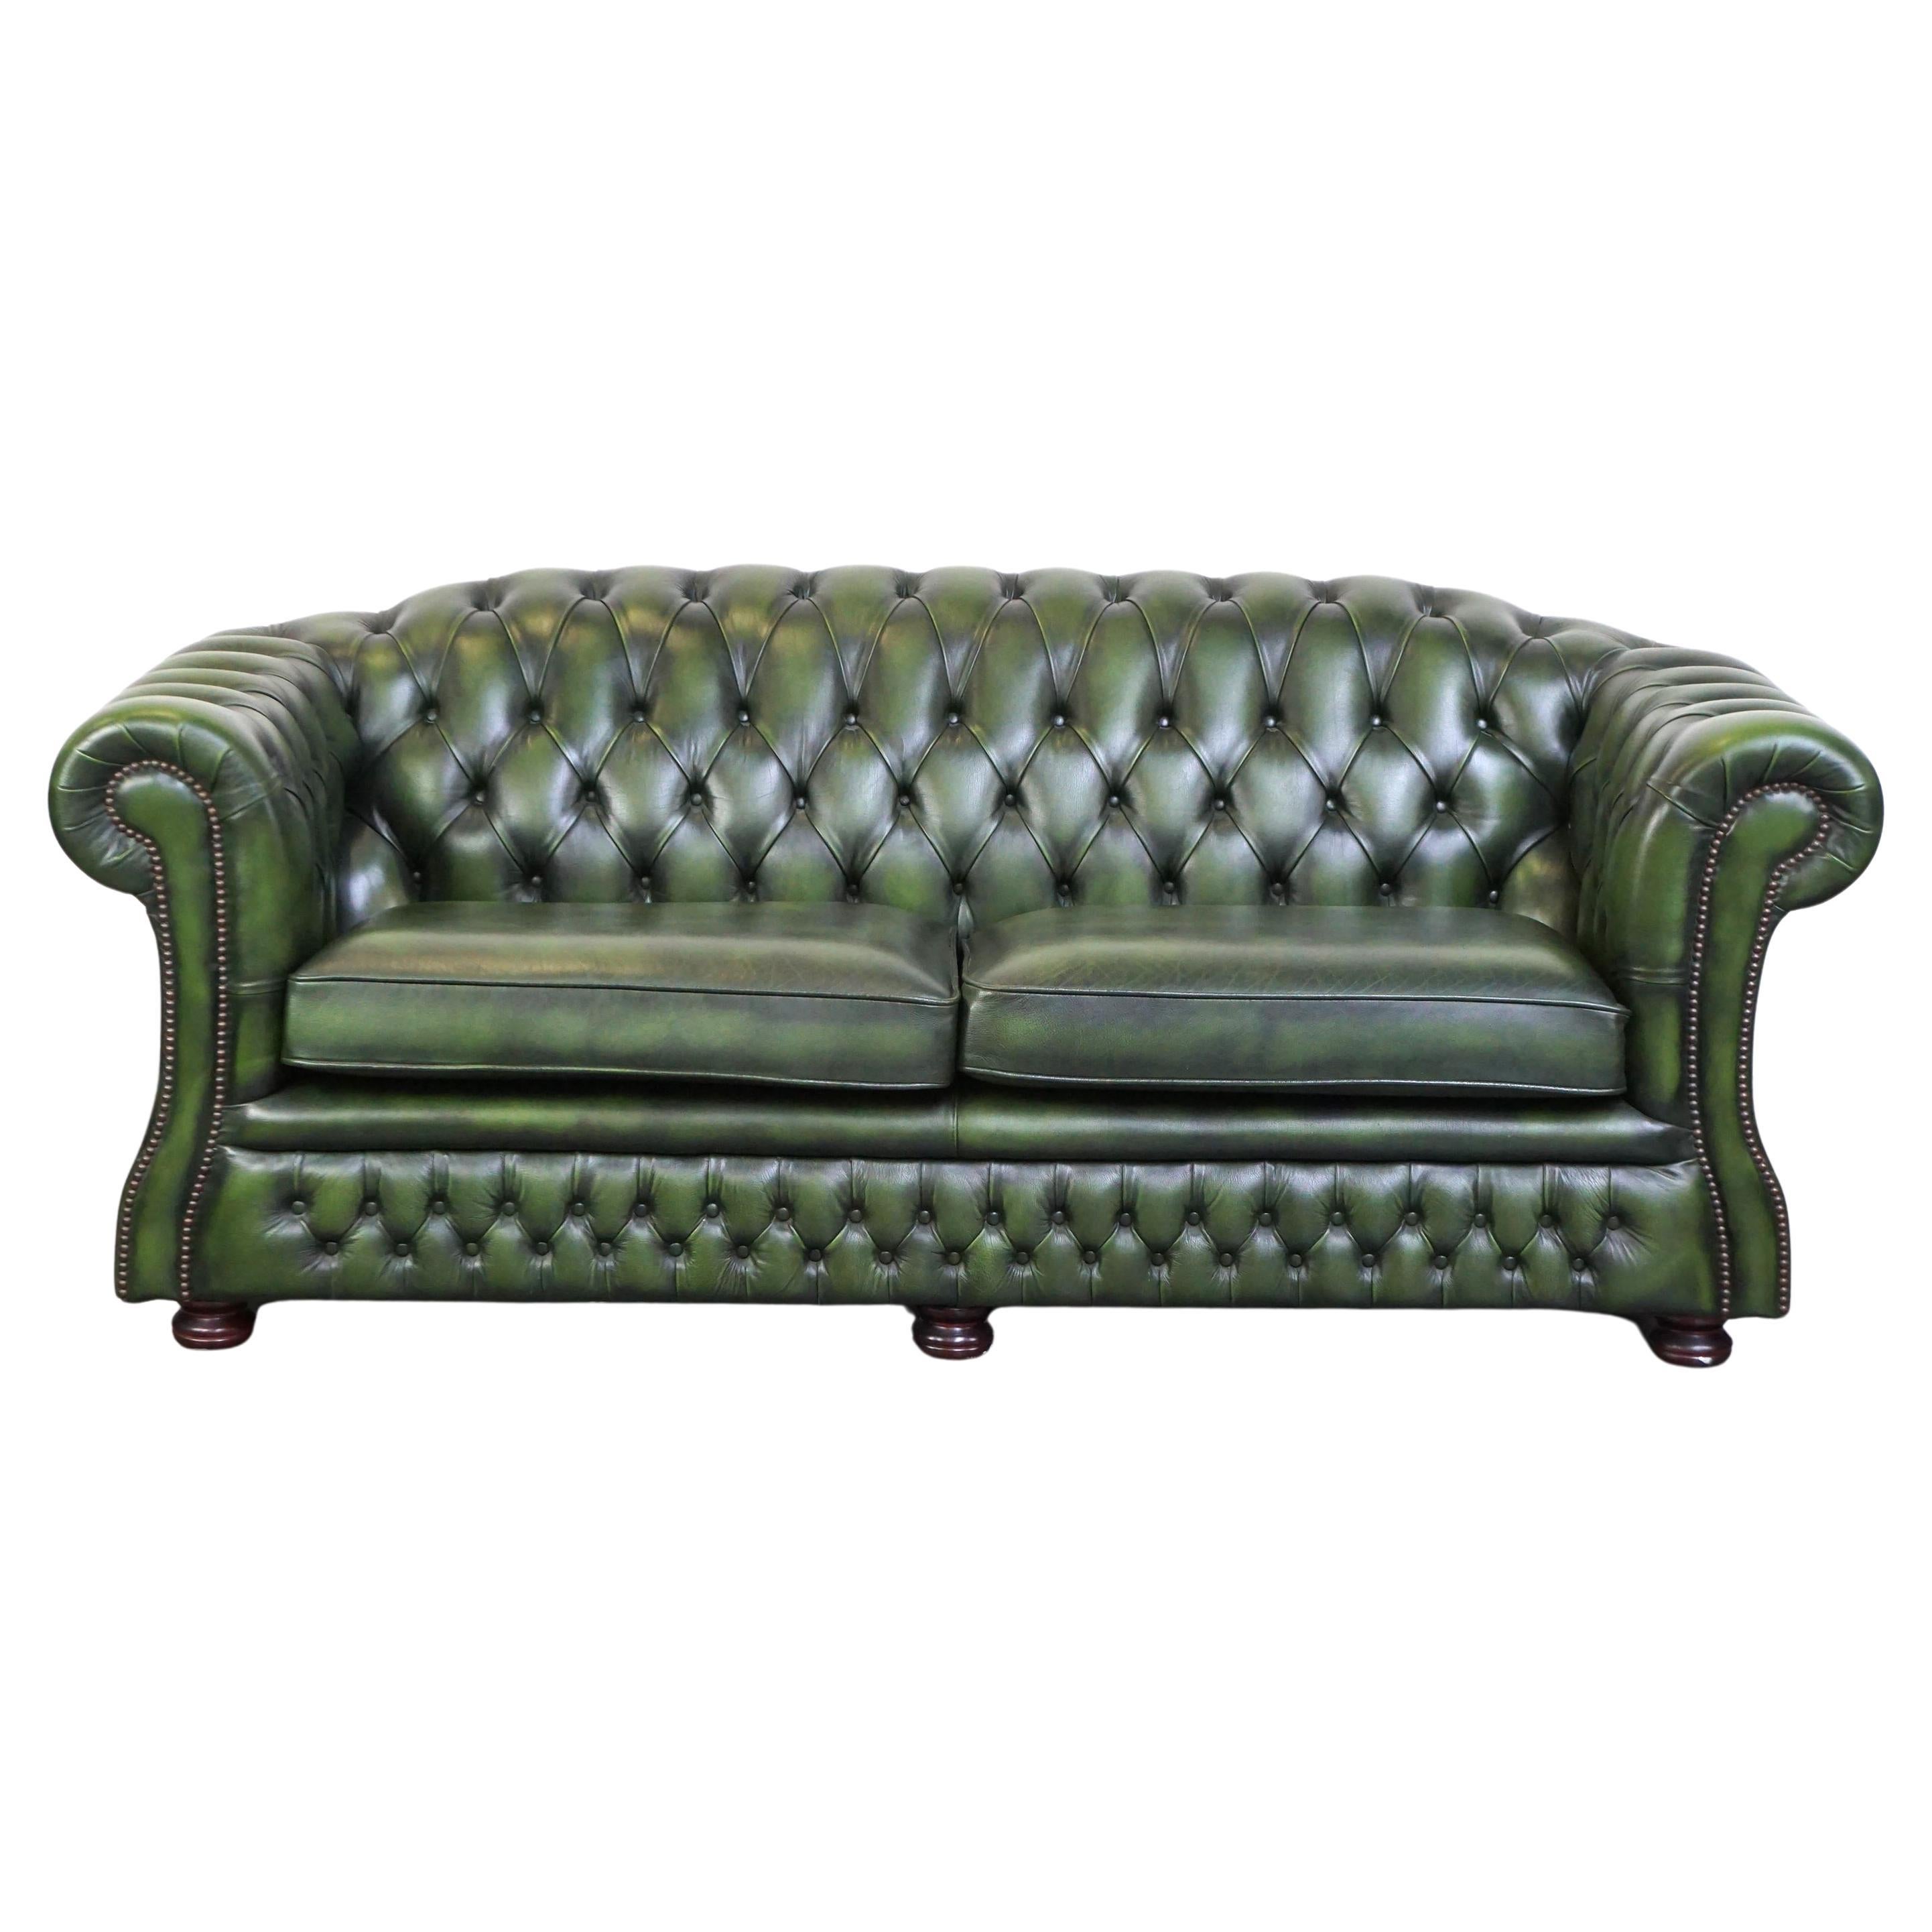 Green English cowhide leather 2.5-seater Chesterfield sofa, very good condition